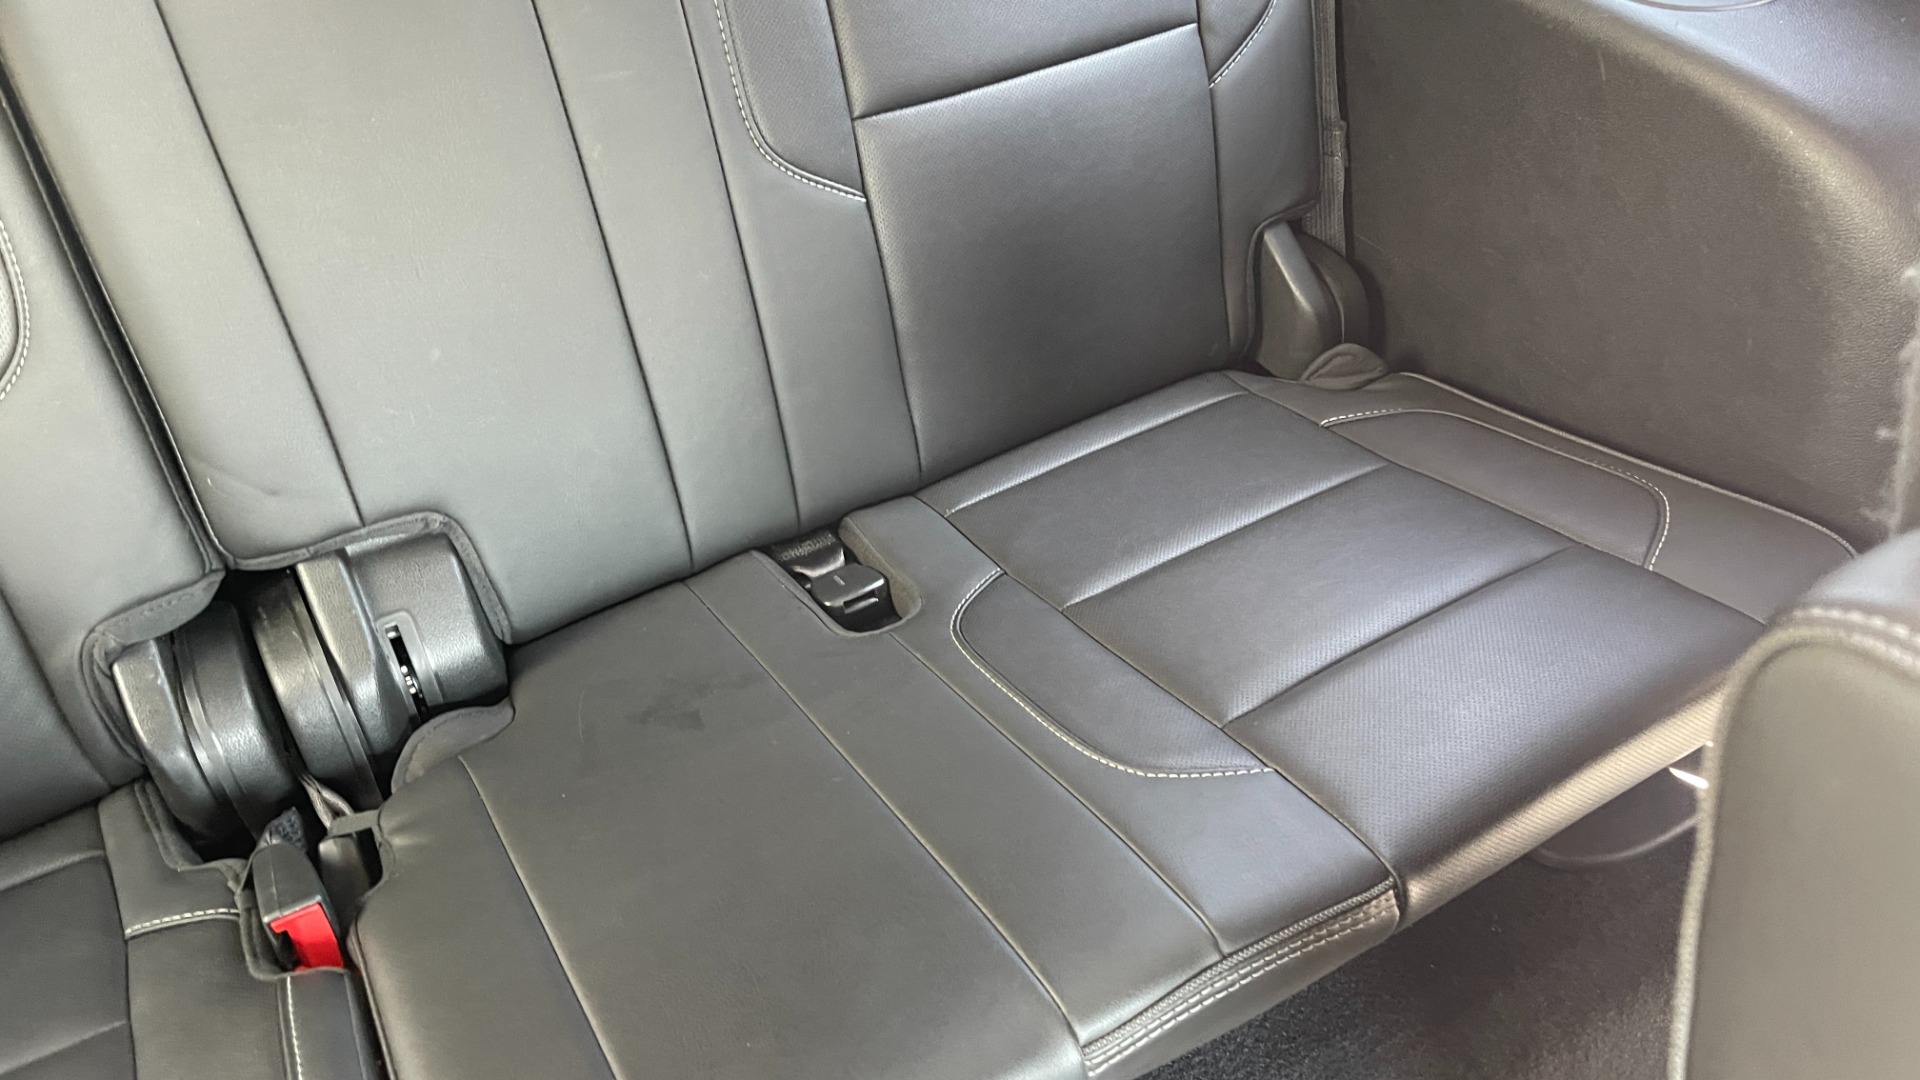 Used 2019 GMC Yukon XL DENALI / LEATHER / 4WD / CAPTAINS CHAIRS / 3 ROW SEATING for sale $55,000 at Formula Imports in Charlotte NC 28227 48